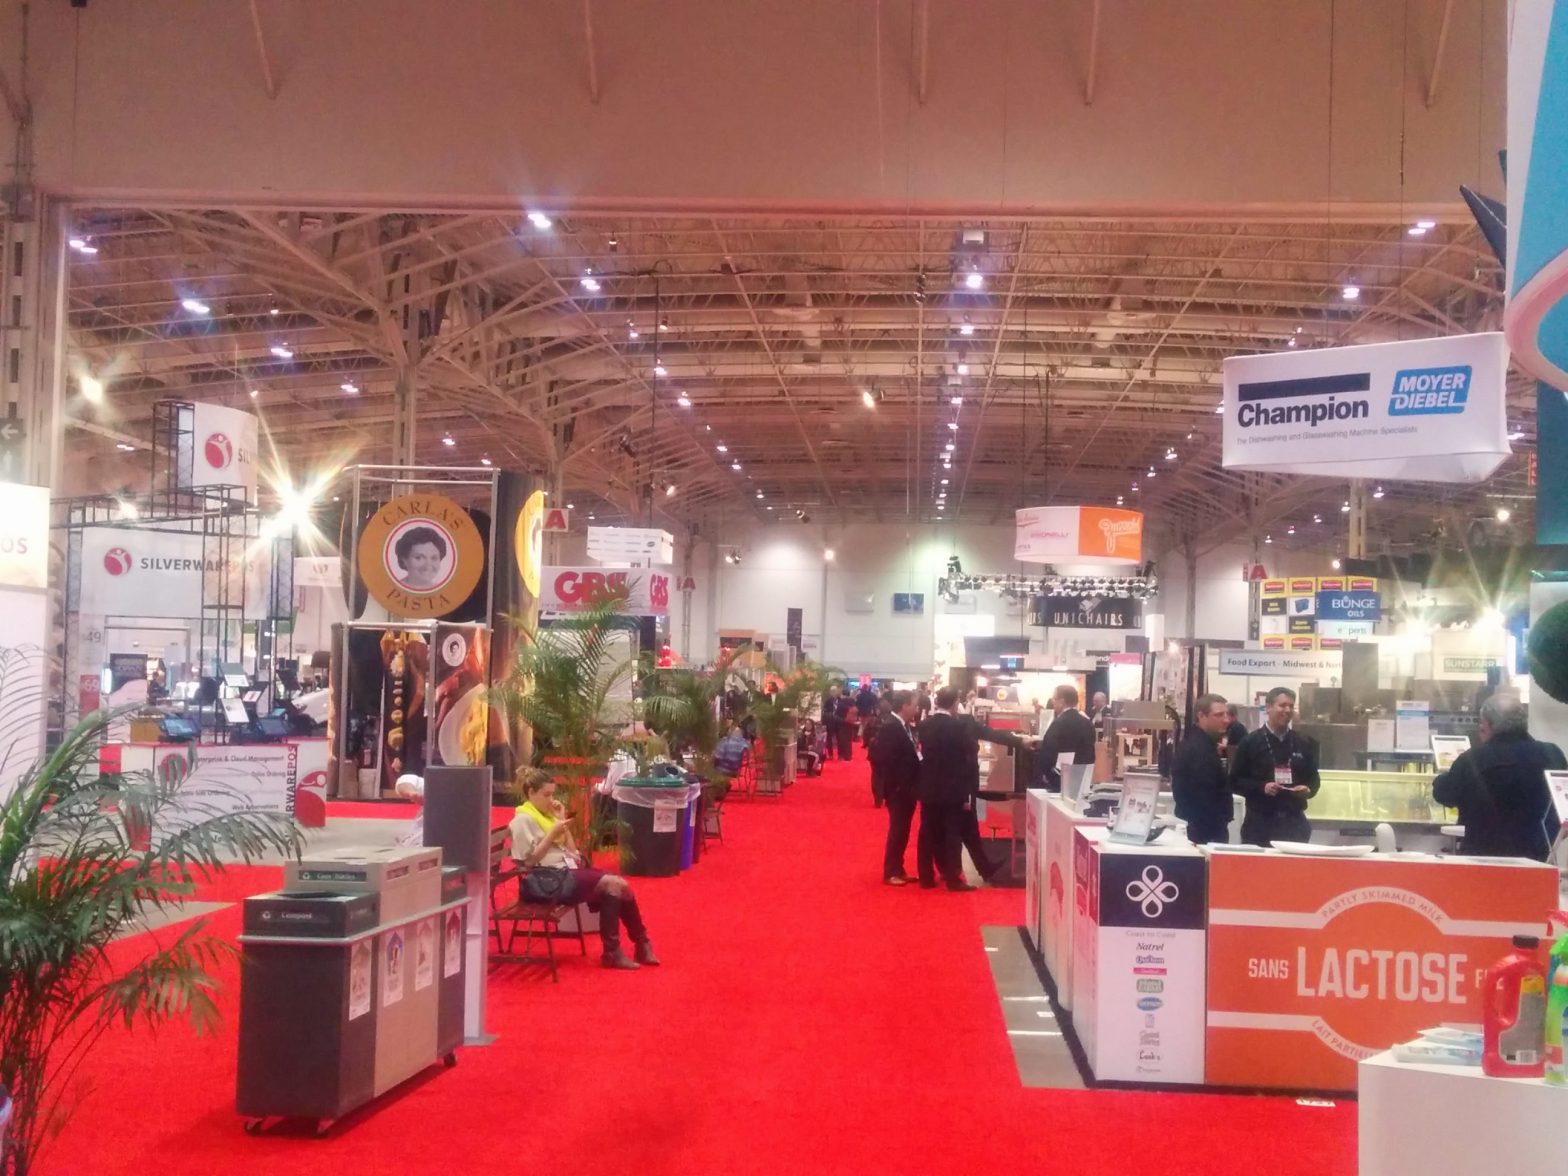 various exhibits at the Restaurants Canada show